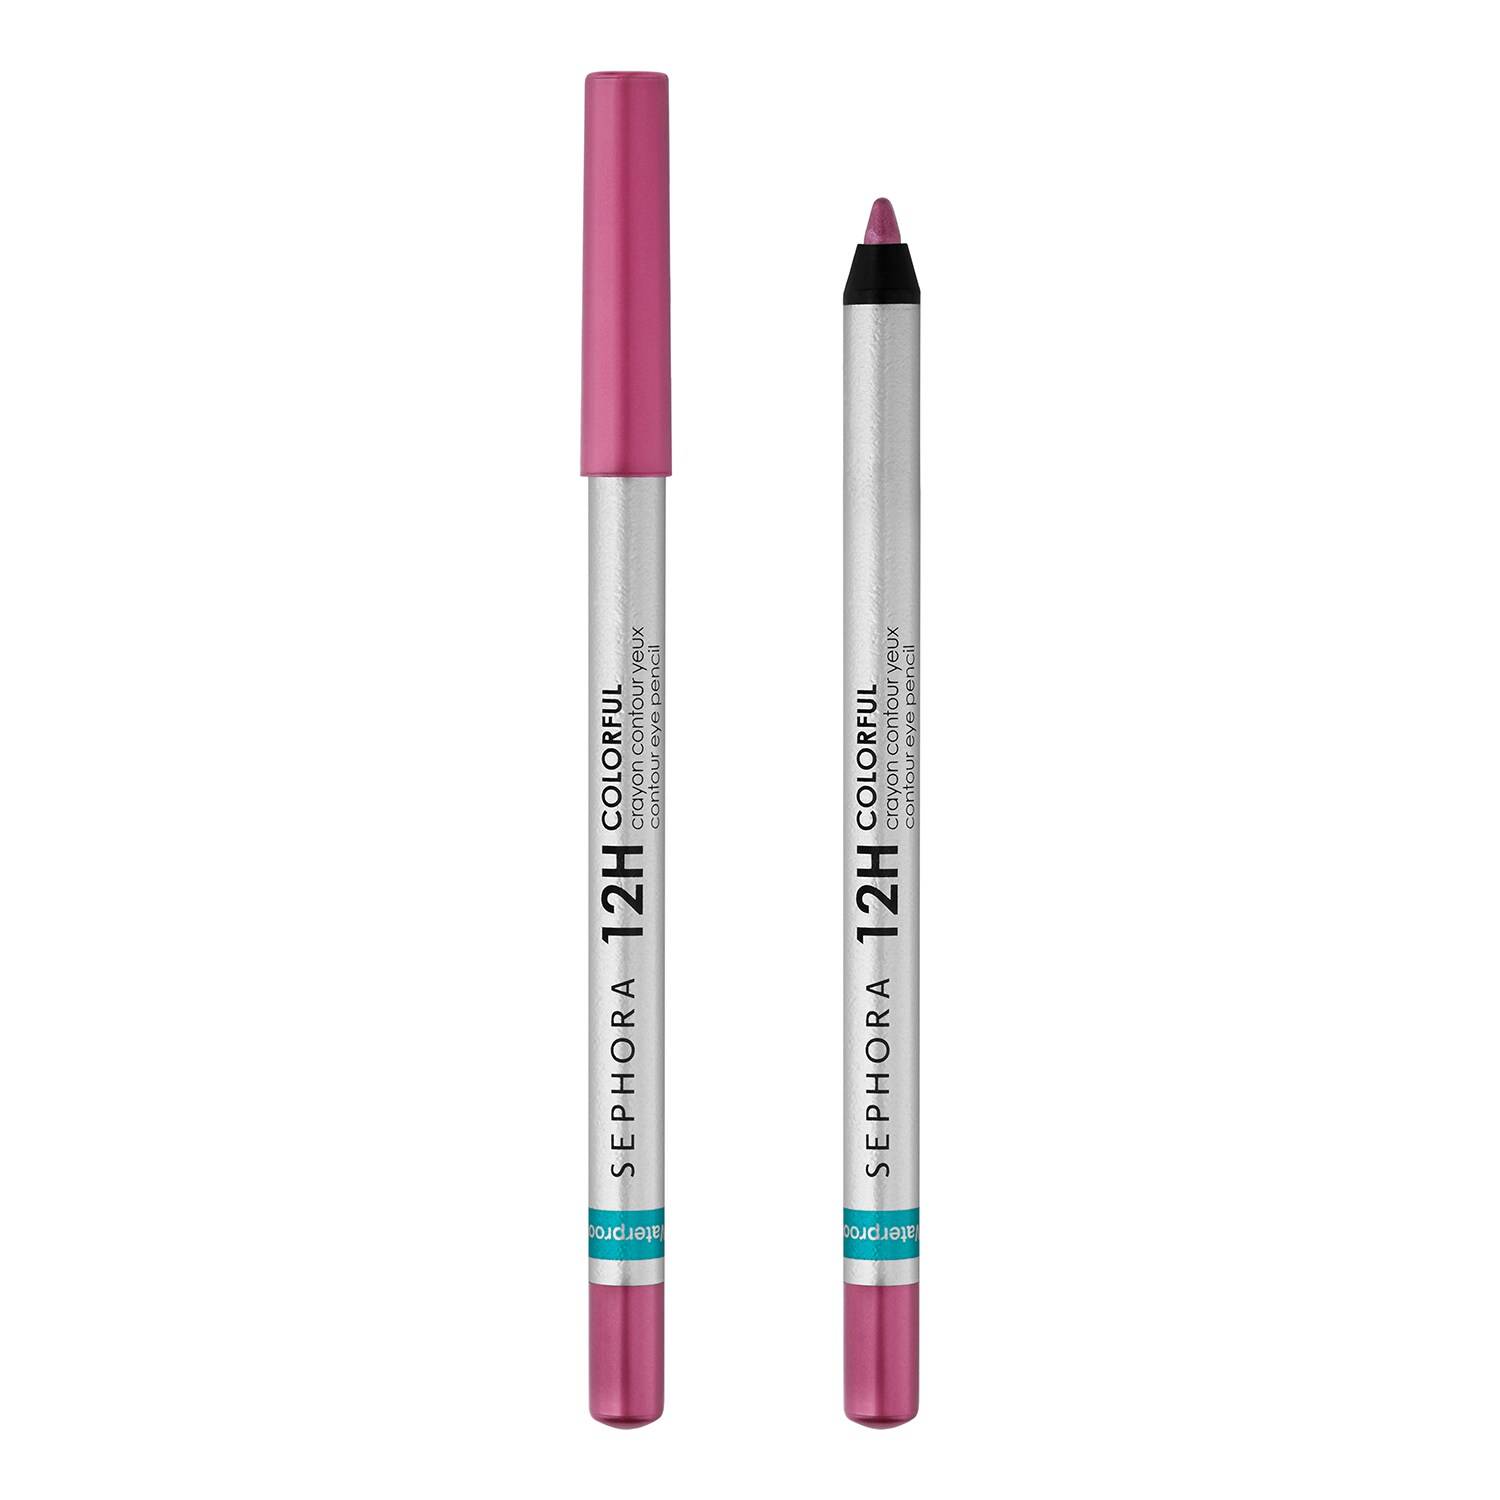 Sephora Collection 12H Coloful Contour Eye Pencil 1G 58 Berry Sweet - Shimmer